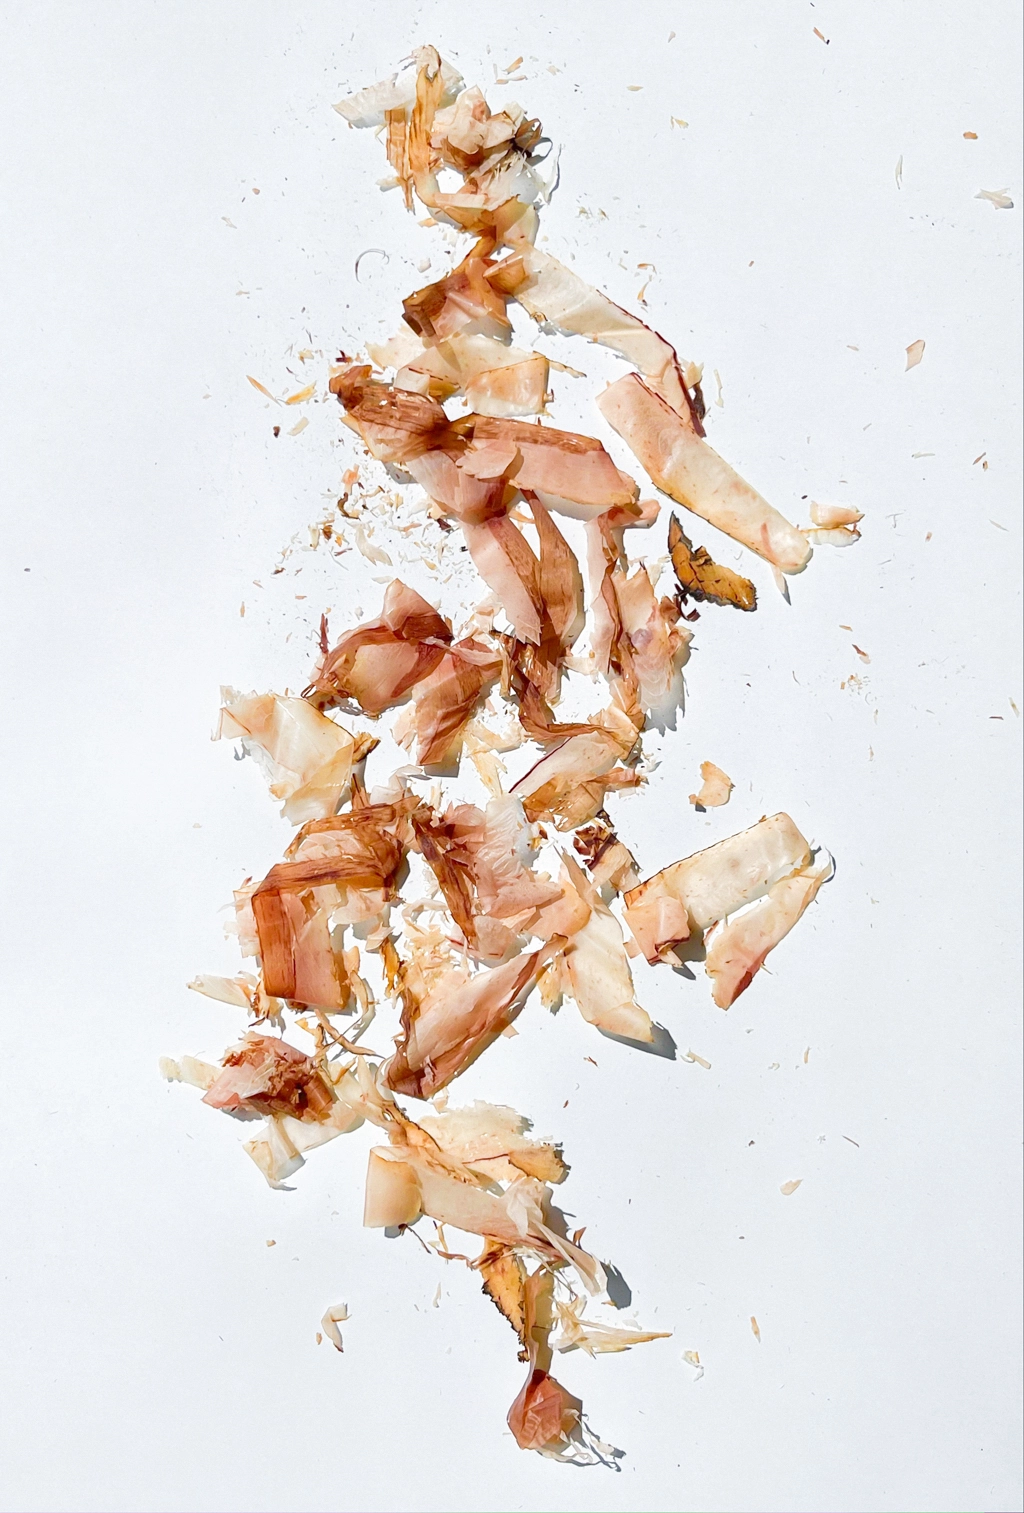 Artwork showing bonito flakes scattered across a white background. Each bonito flake is shown to have a slightly different color.